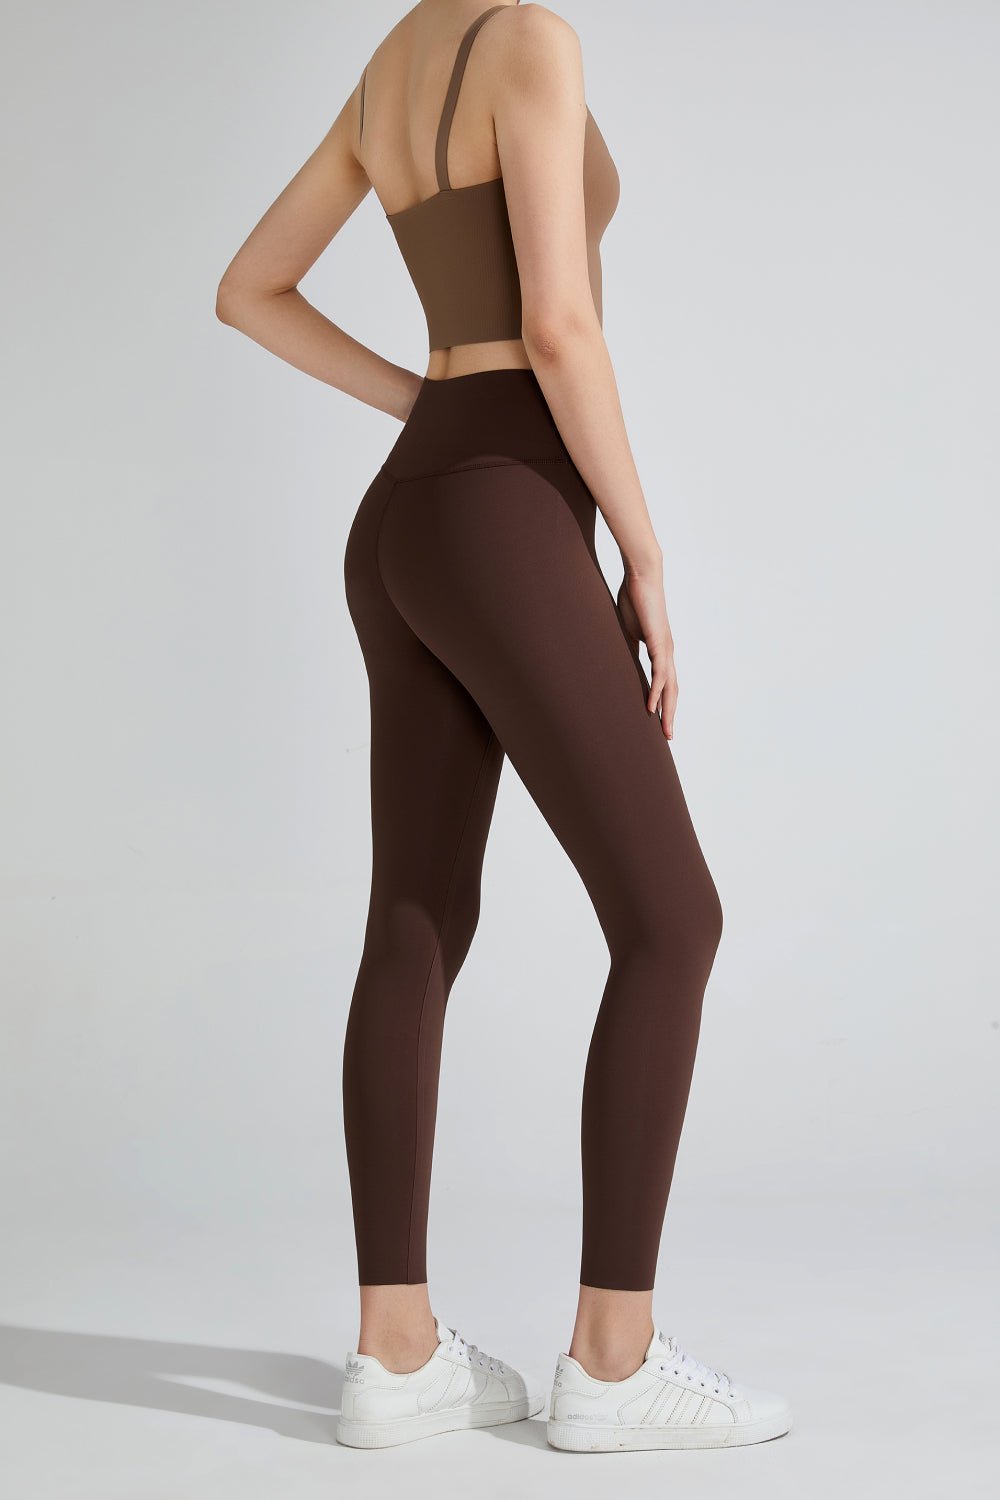 "Enchanting Movement - Embrace Your Inner Beauty with High Waist Breathable Sports Leggings, a Second Skin for Graceful Motion." - Guy Christopher